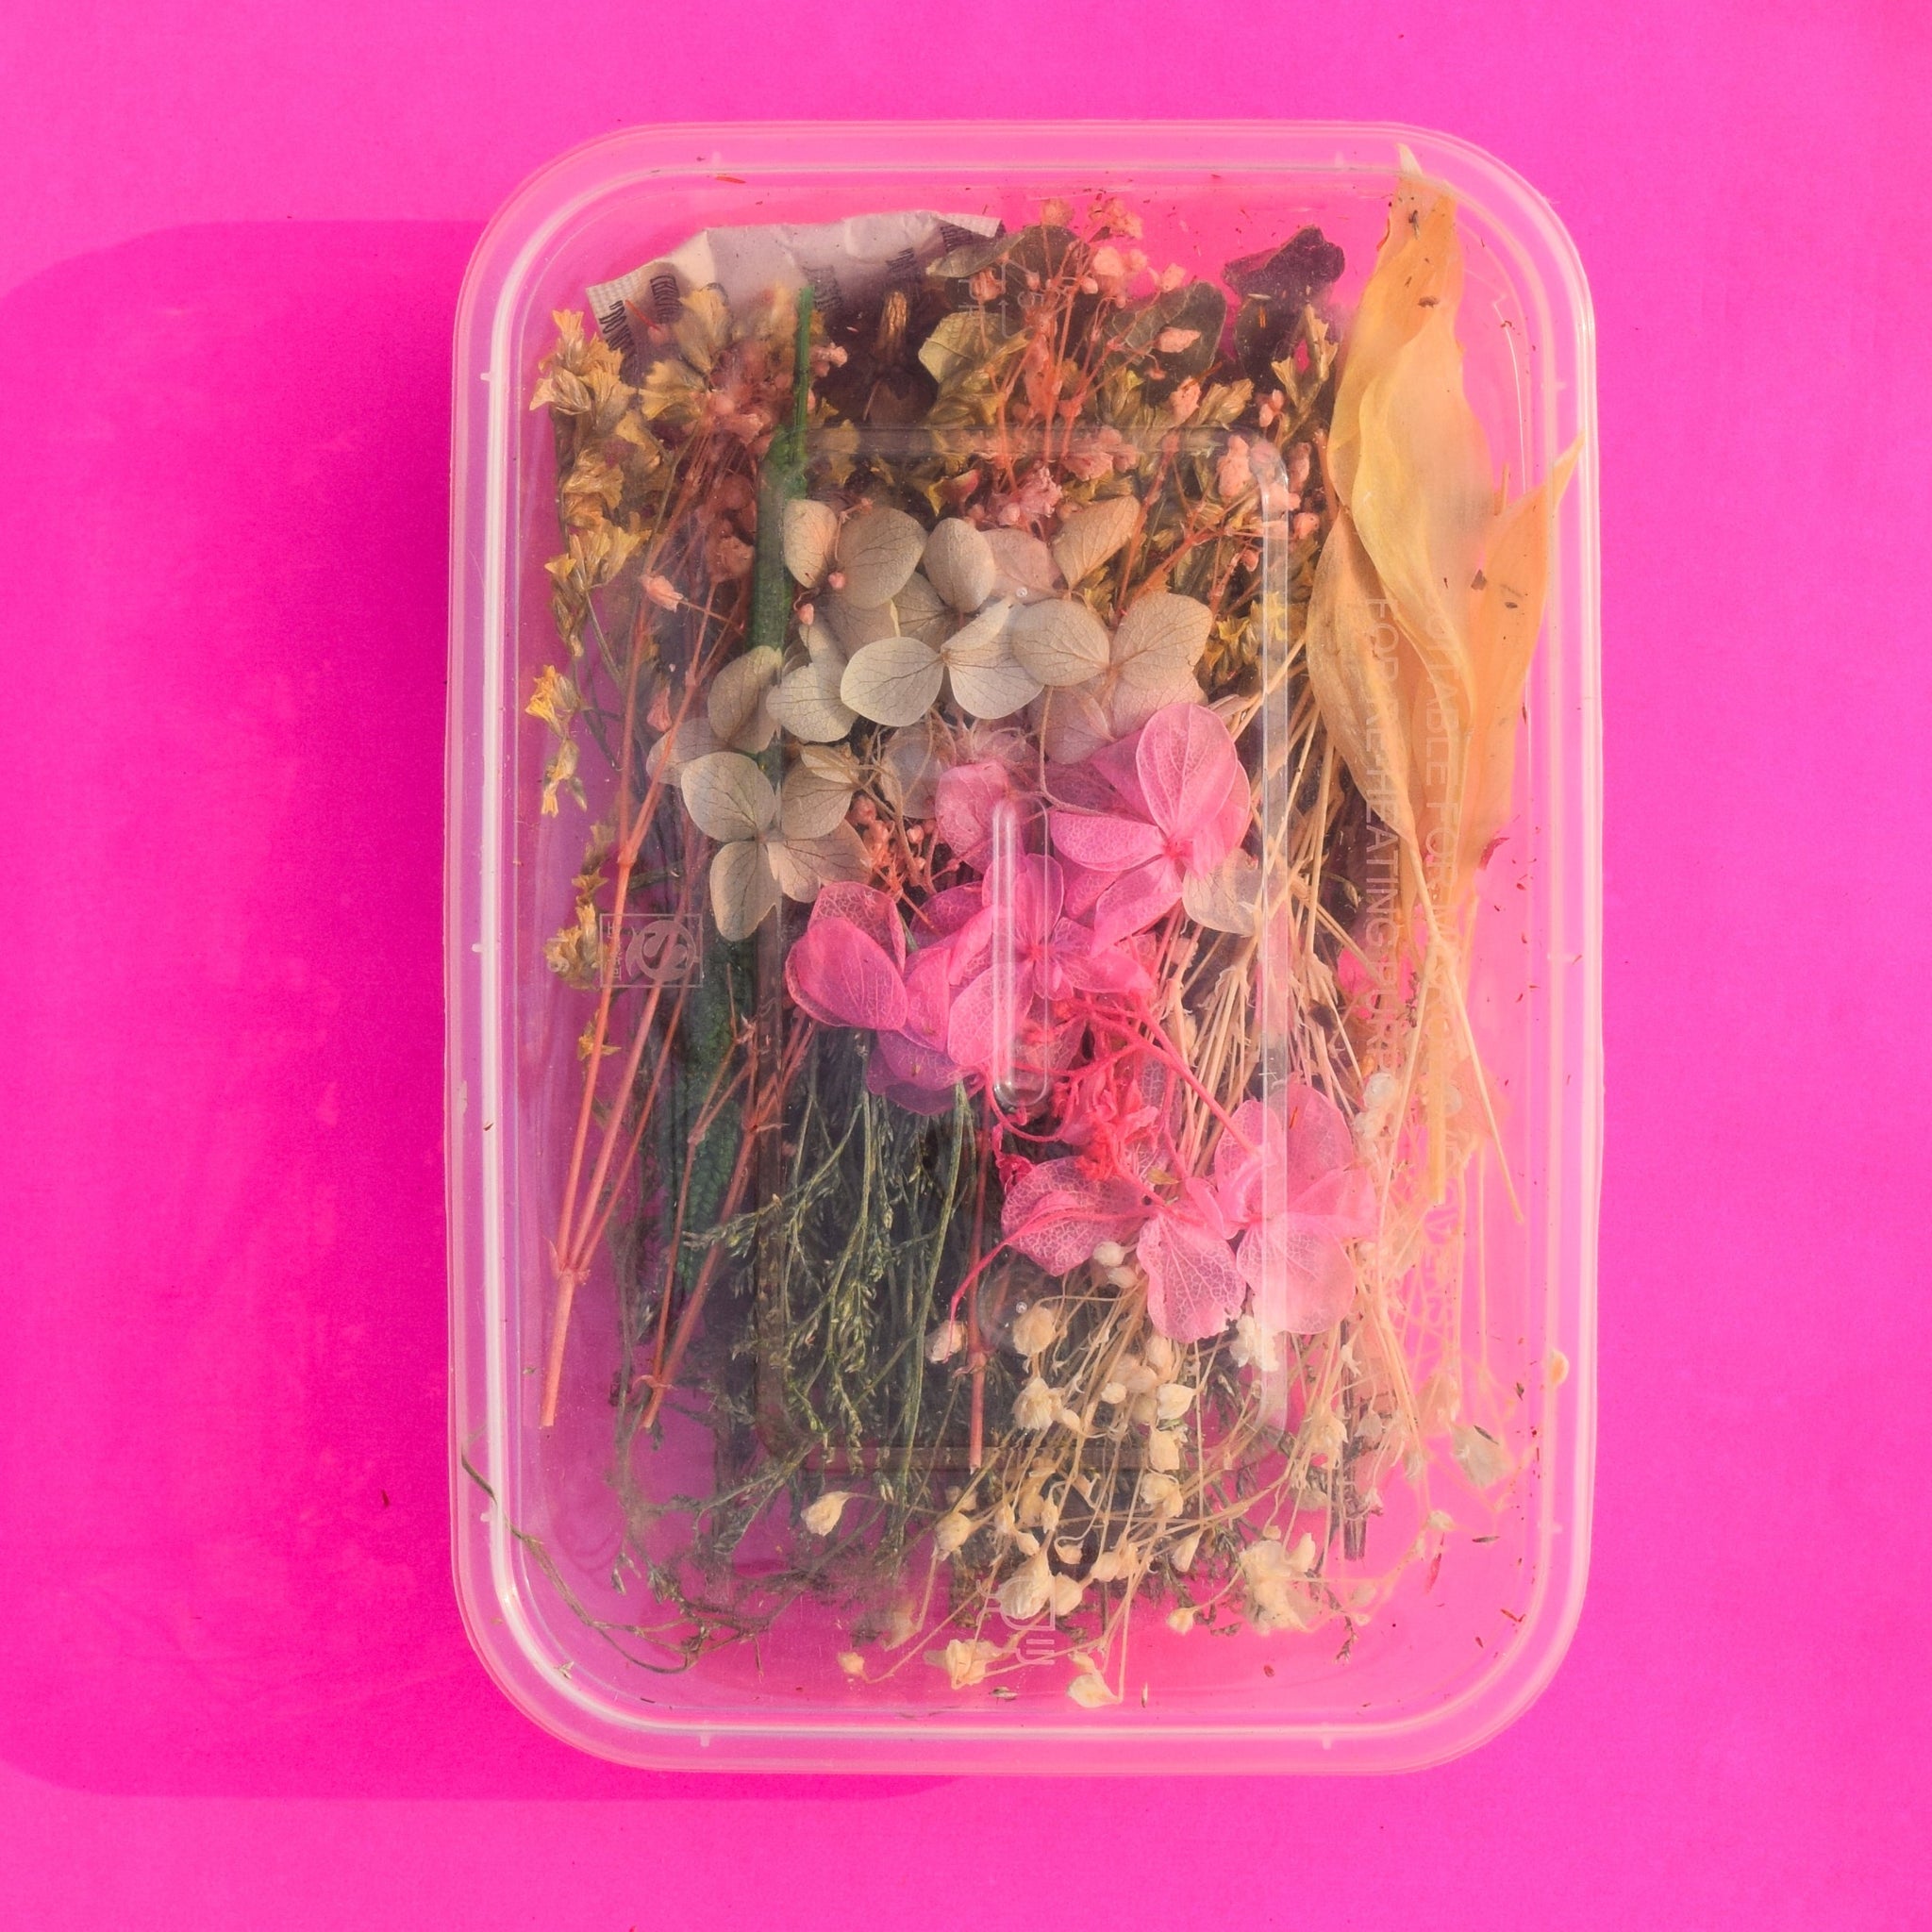 Dried flower - Pretty pink with greens